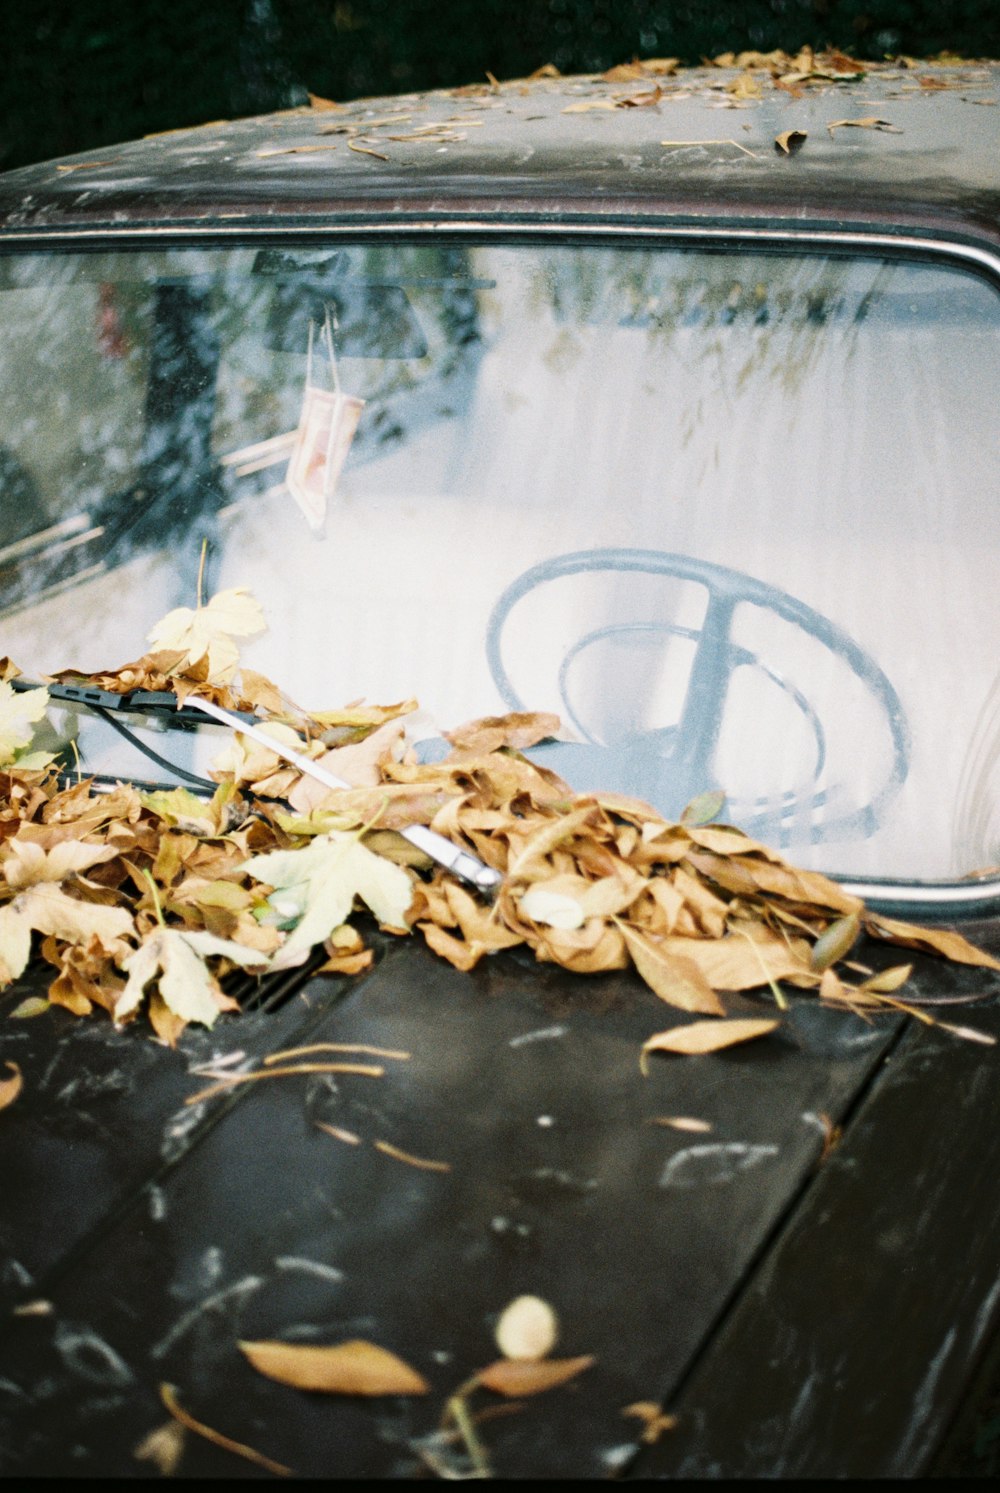 a pile of leaves on the hood of an old car